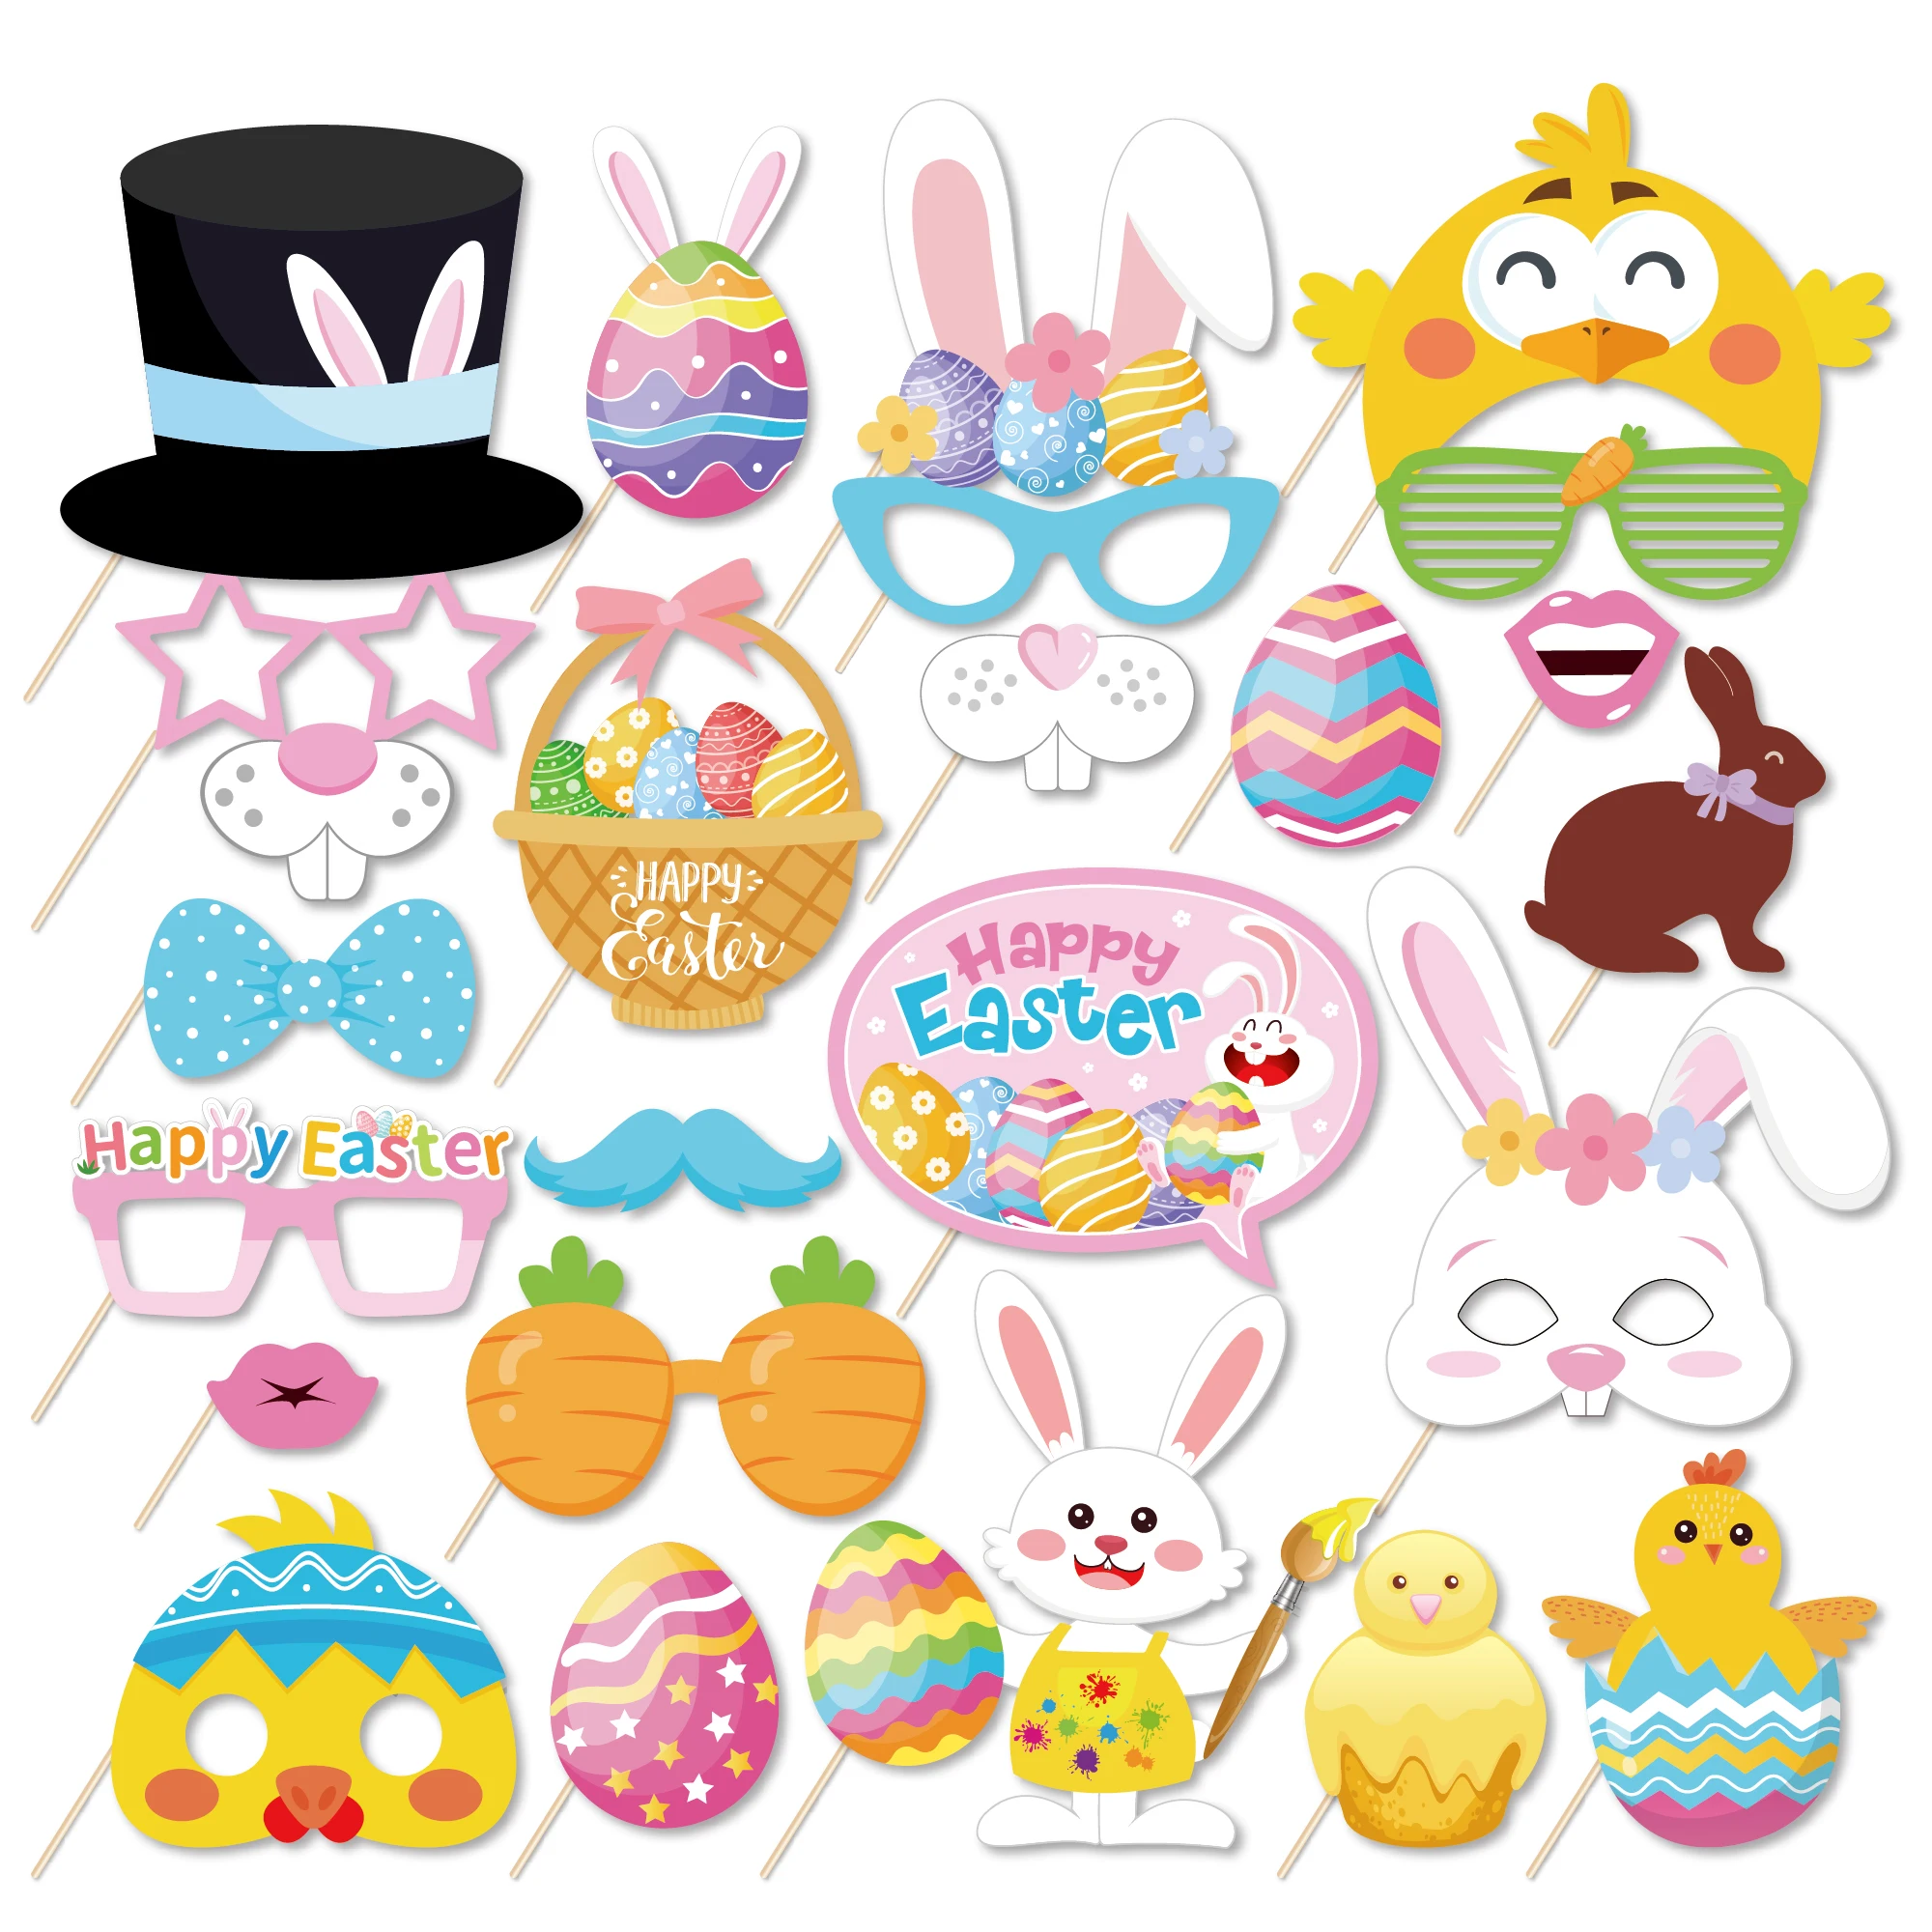 

25pcs/set Cartoon Rabbit Happy Easter Day Easter Bunny Birthday Party Paper Photobooth Props Spring Party Phototaking Decoration